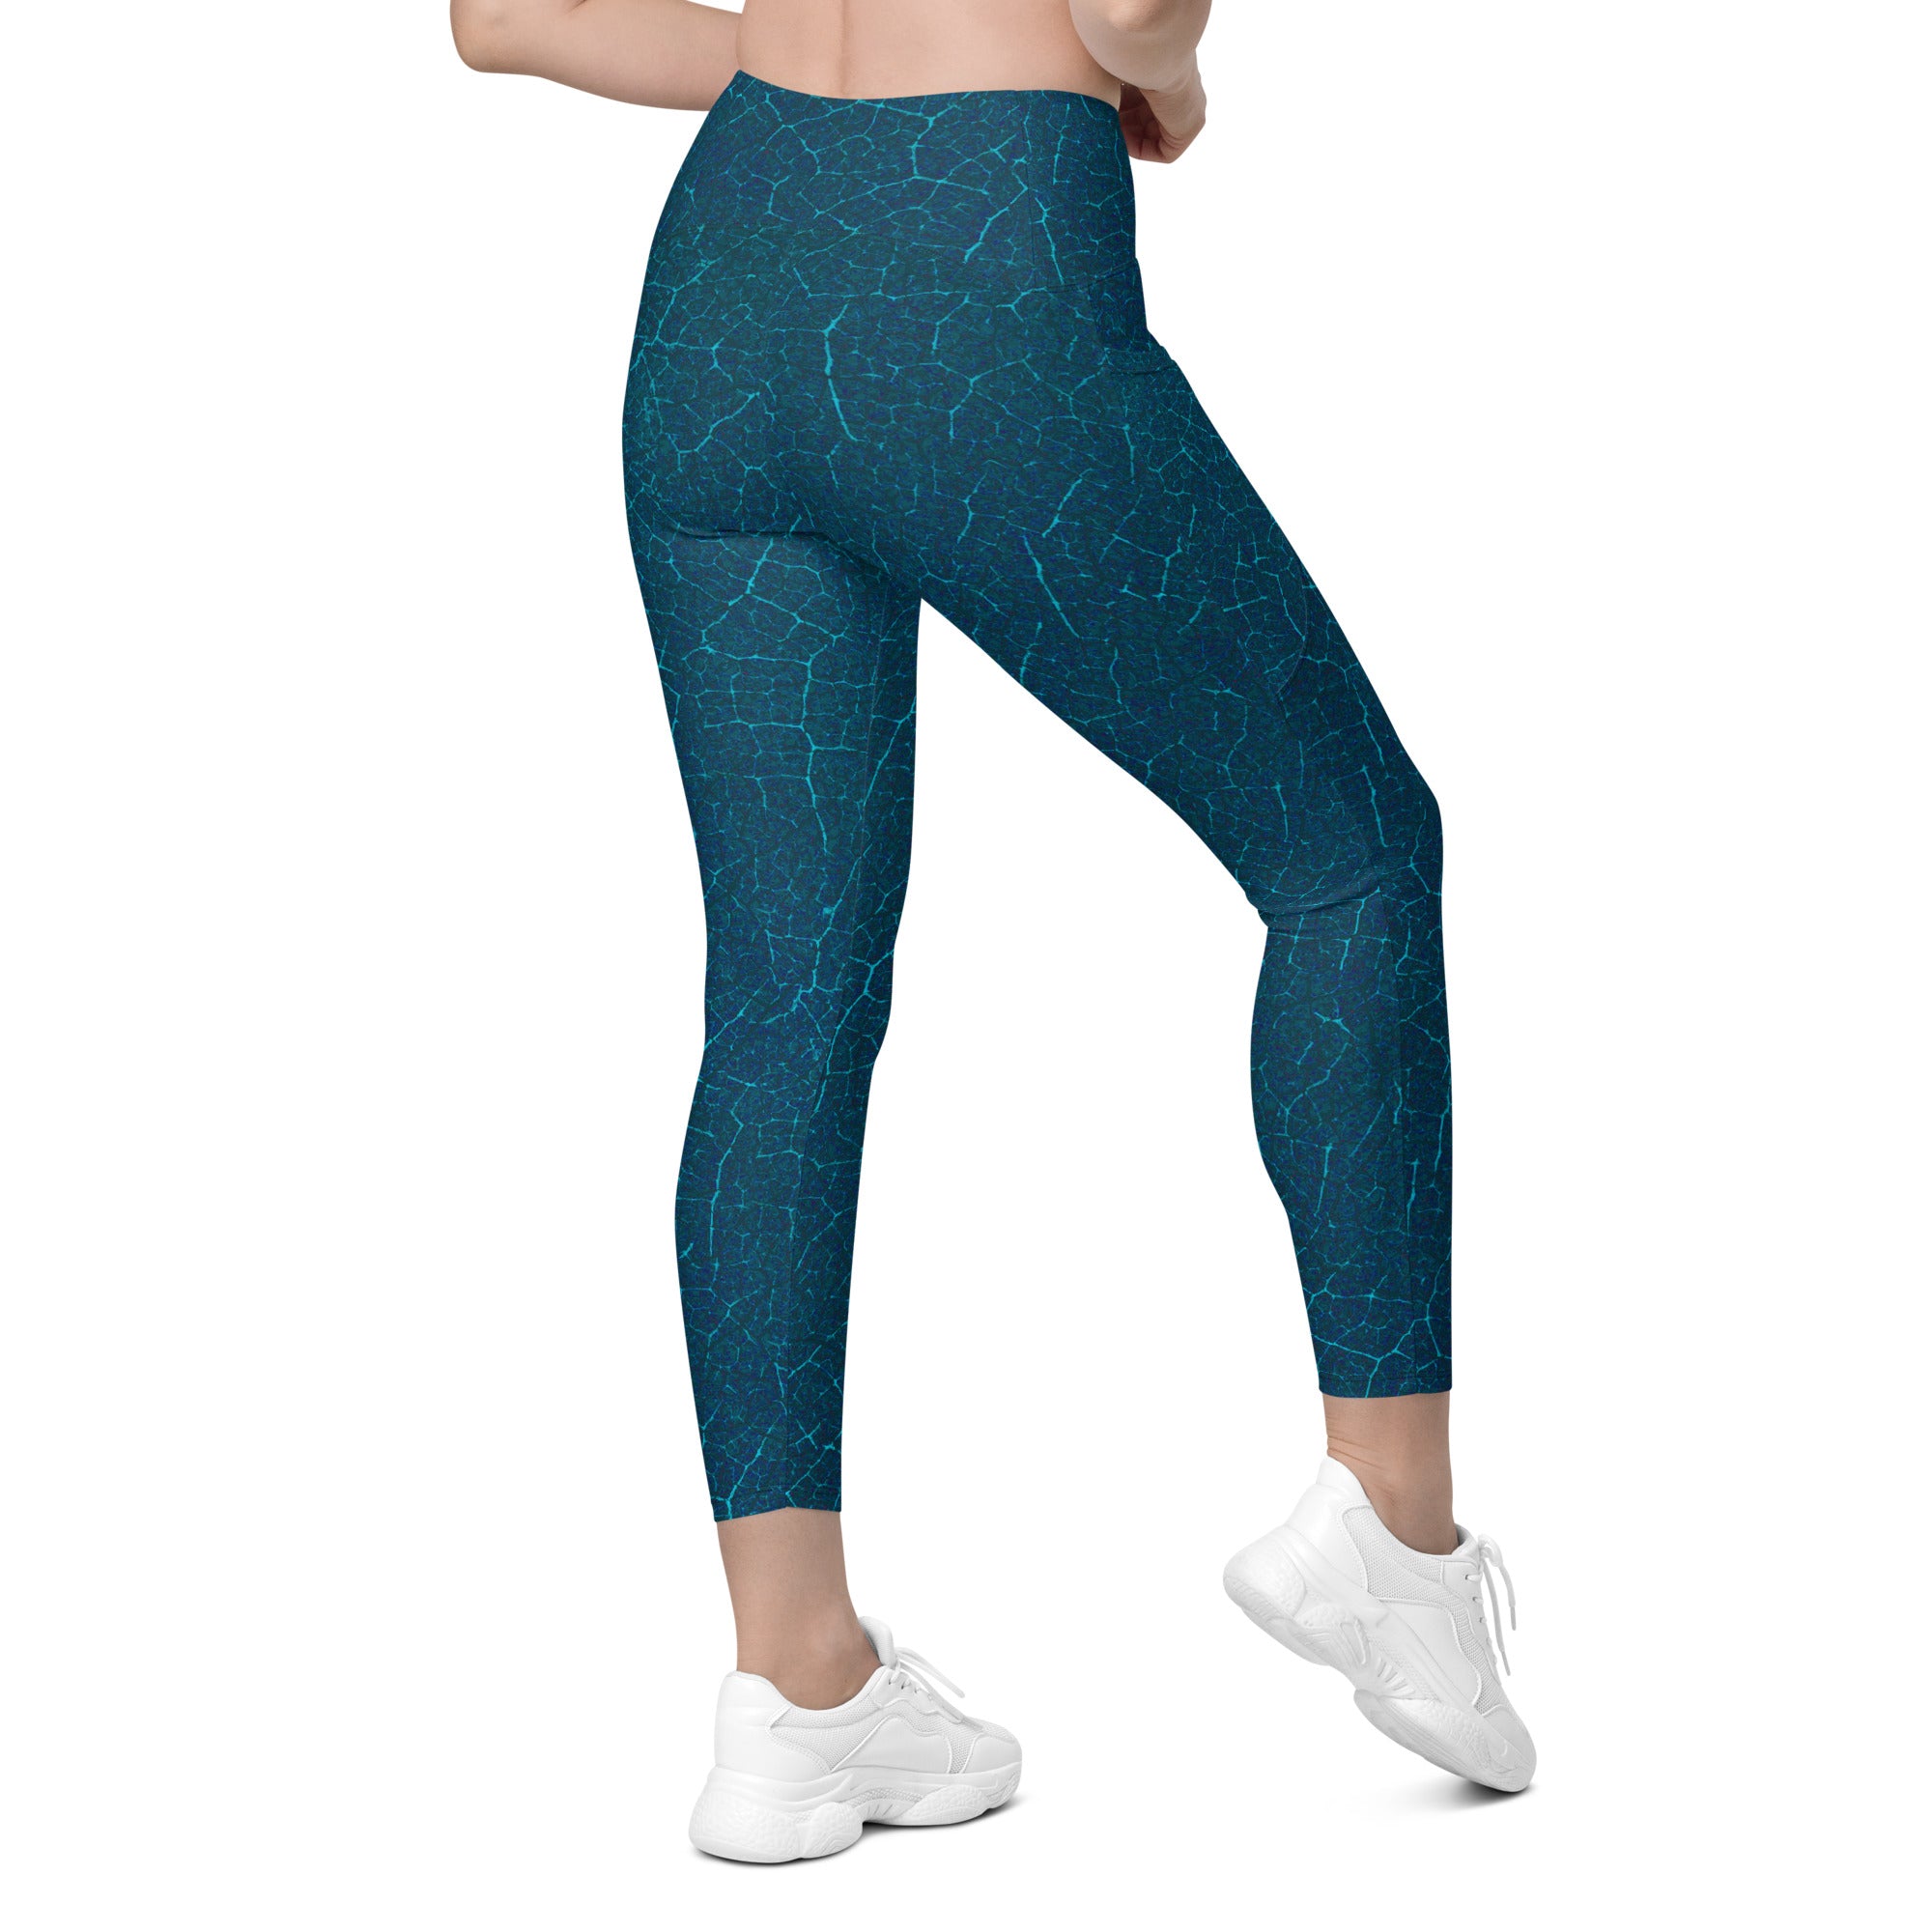 Tropical Oasis Crossover Leggings laid flat, showcasing the detailed tropical design and unique waist feature.